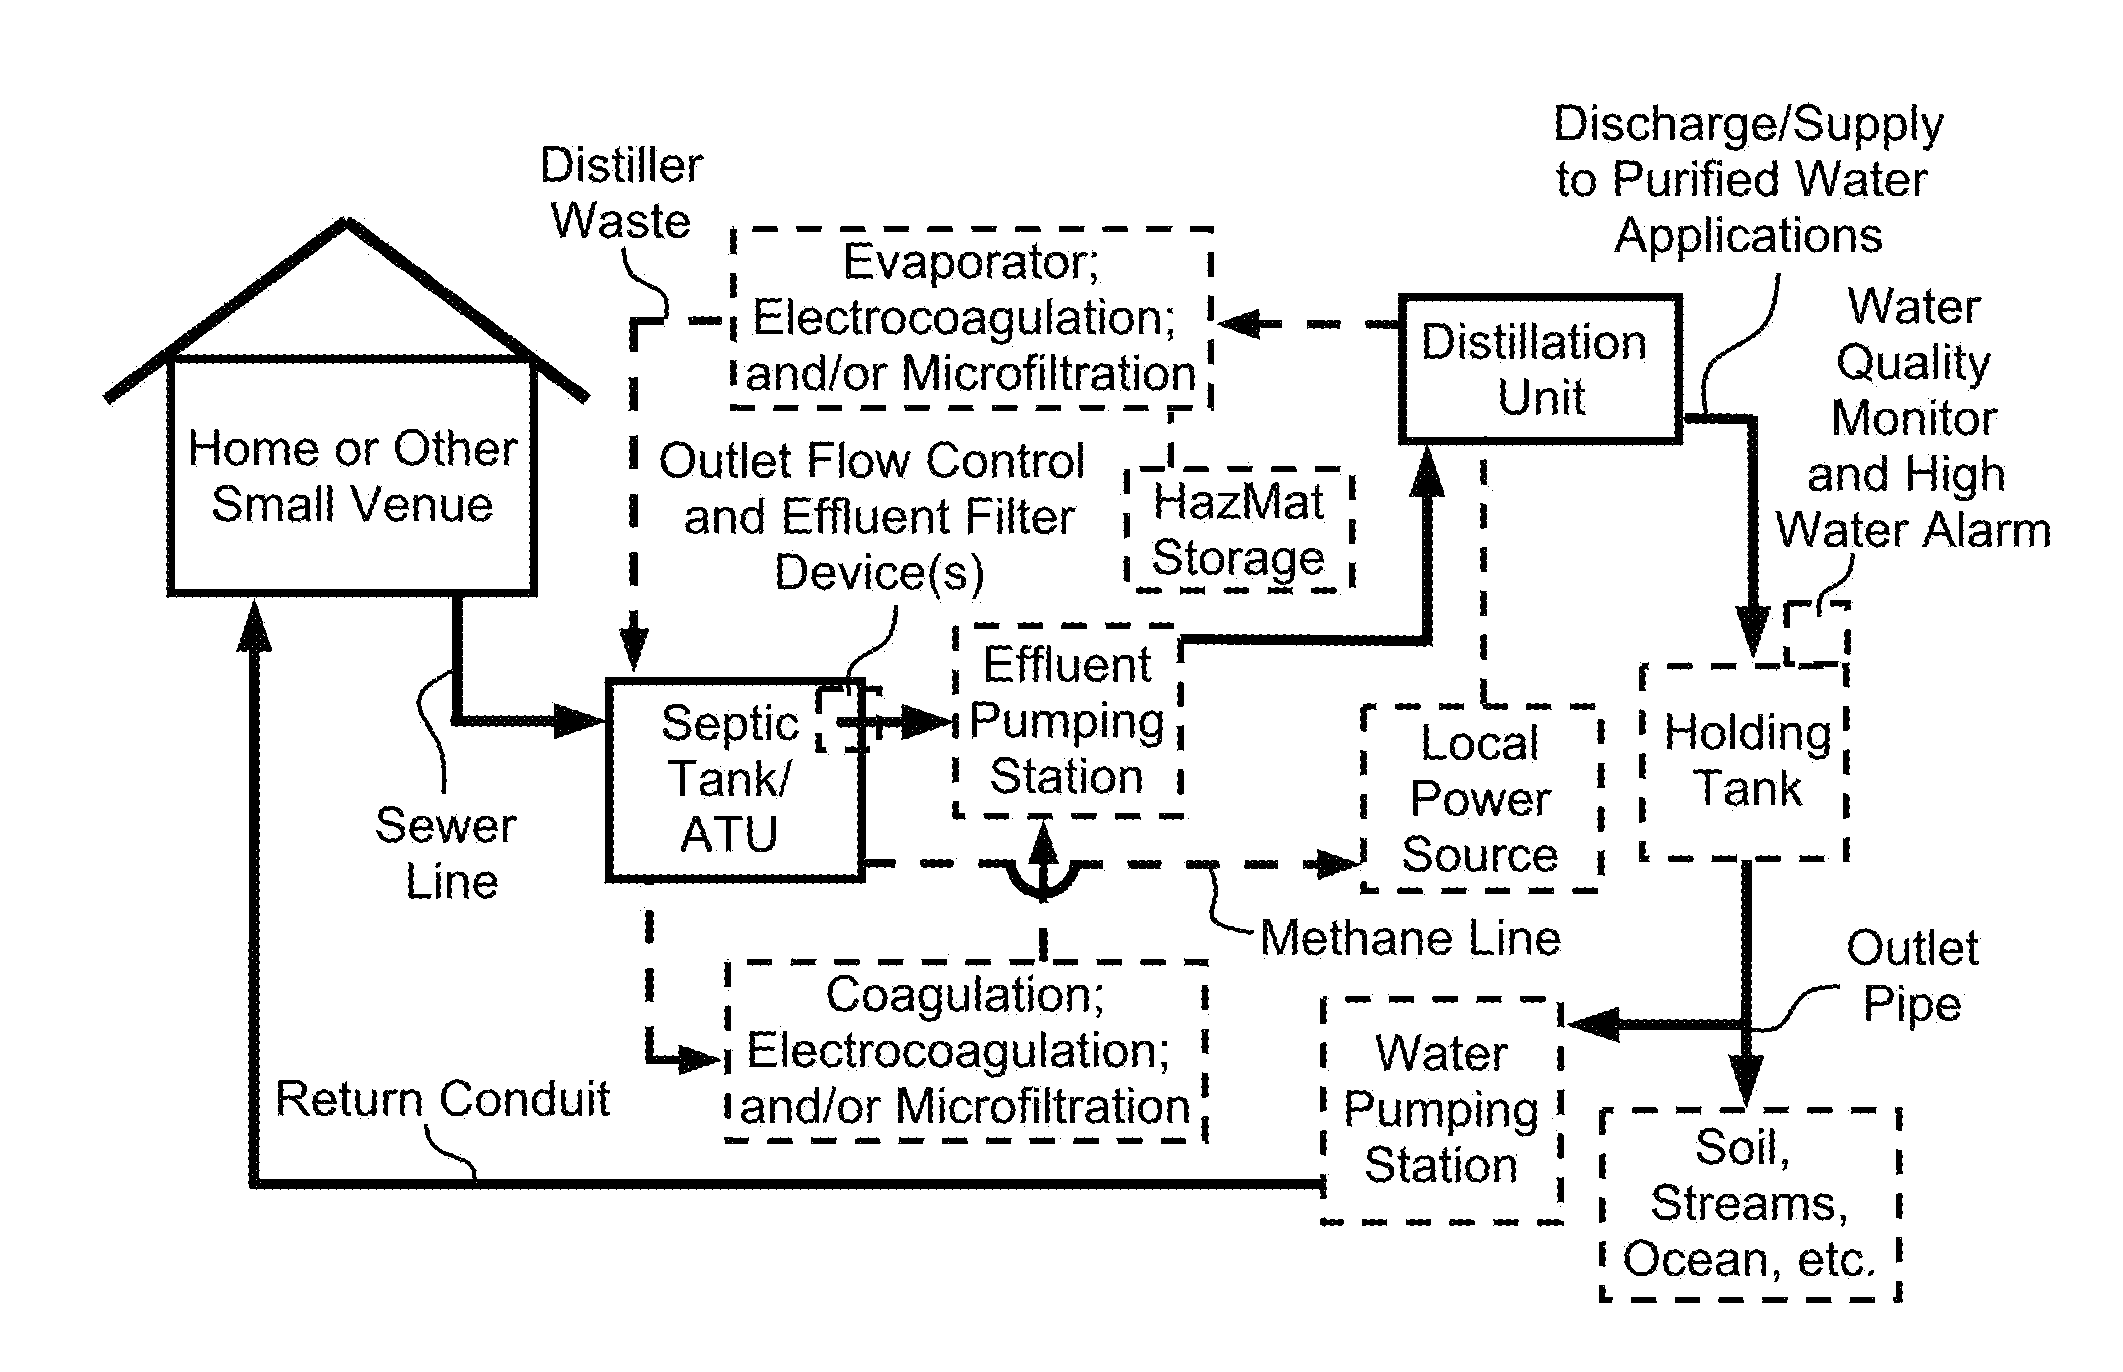 System and method of purifying and recycling or discharging septic tank effluent, graywater, rainwater and stormwater